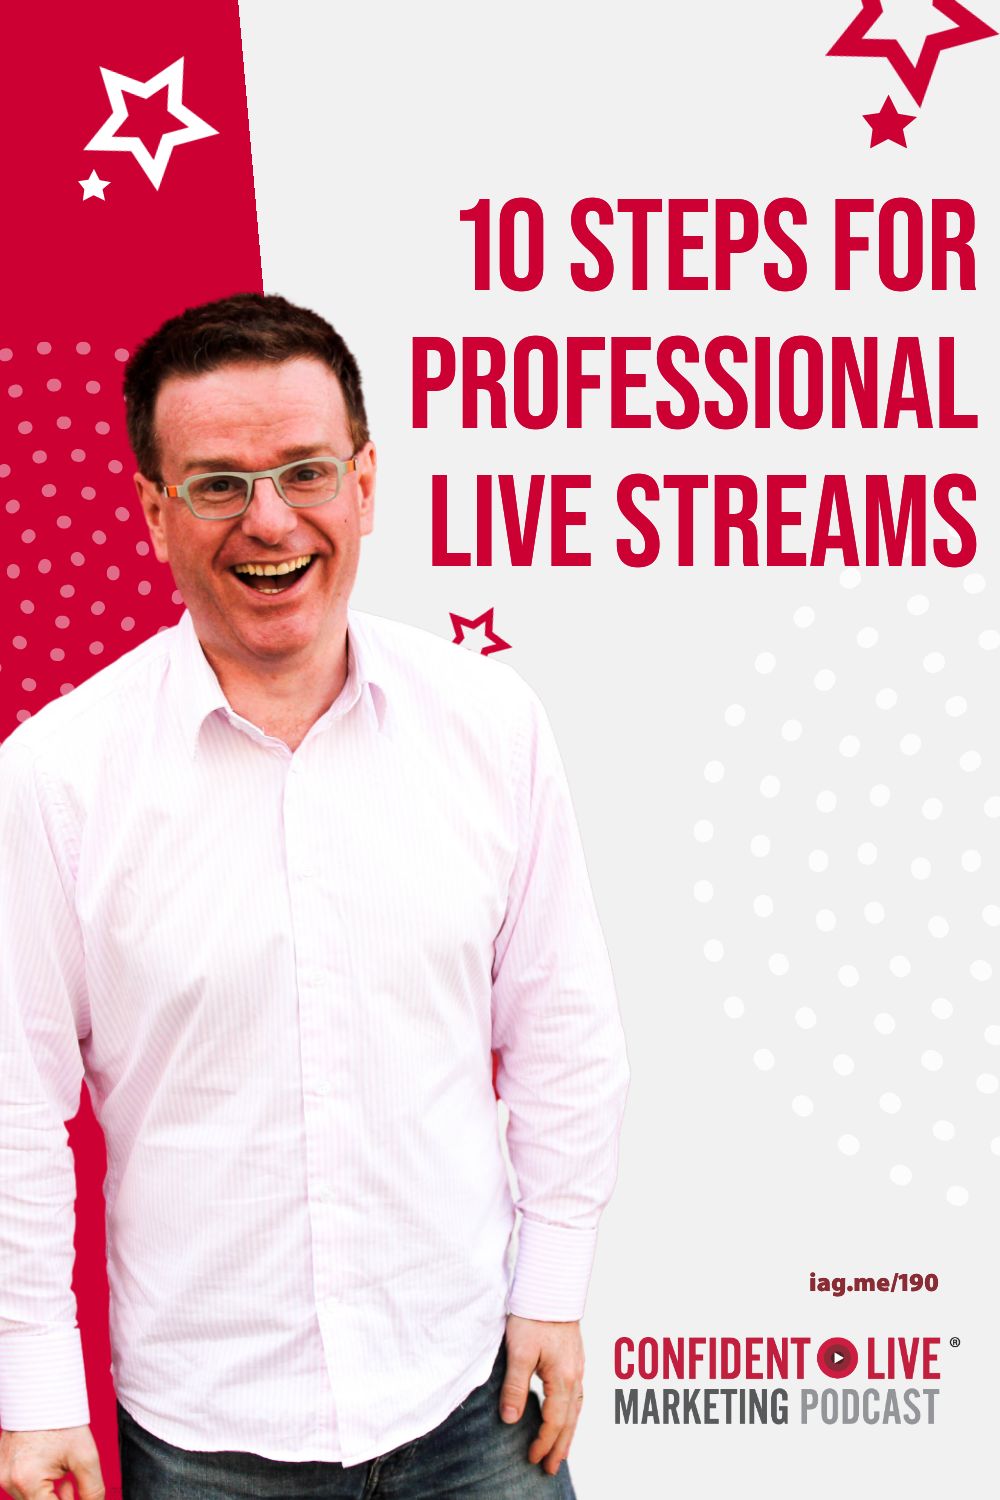 10 Steps for Professional Live Streams